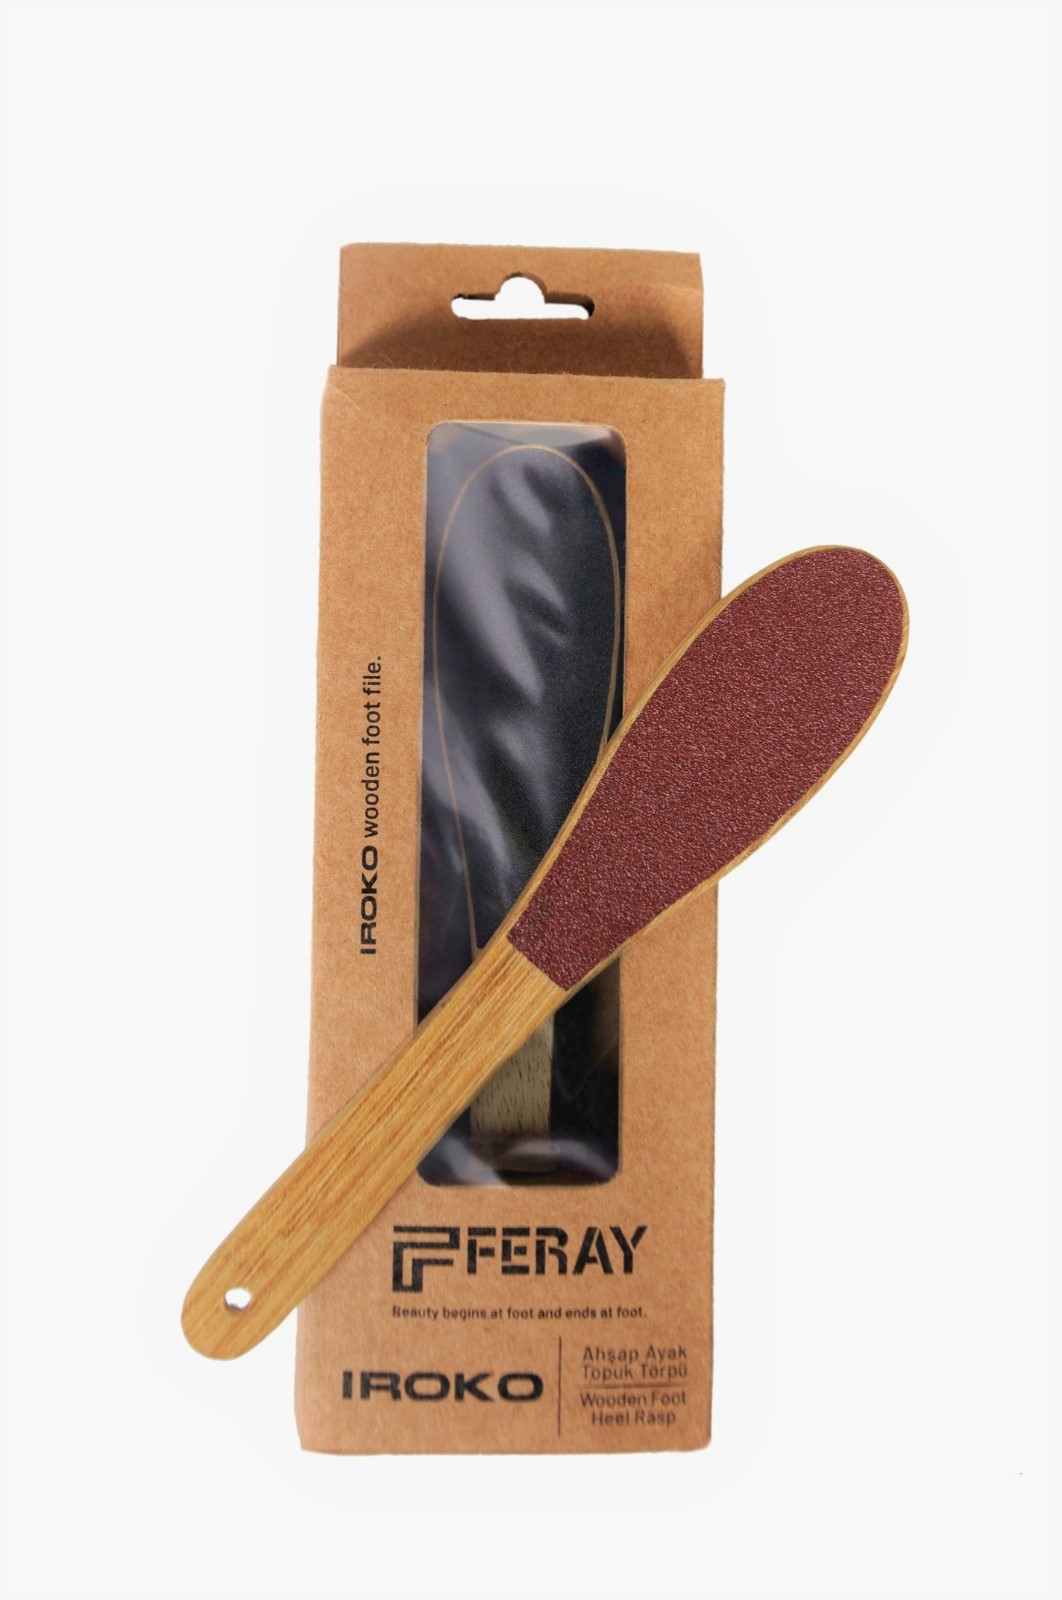 Feray double sided iroko wooden foot file, callus rough, dead skin remover